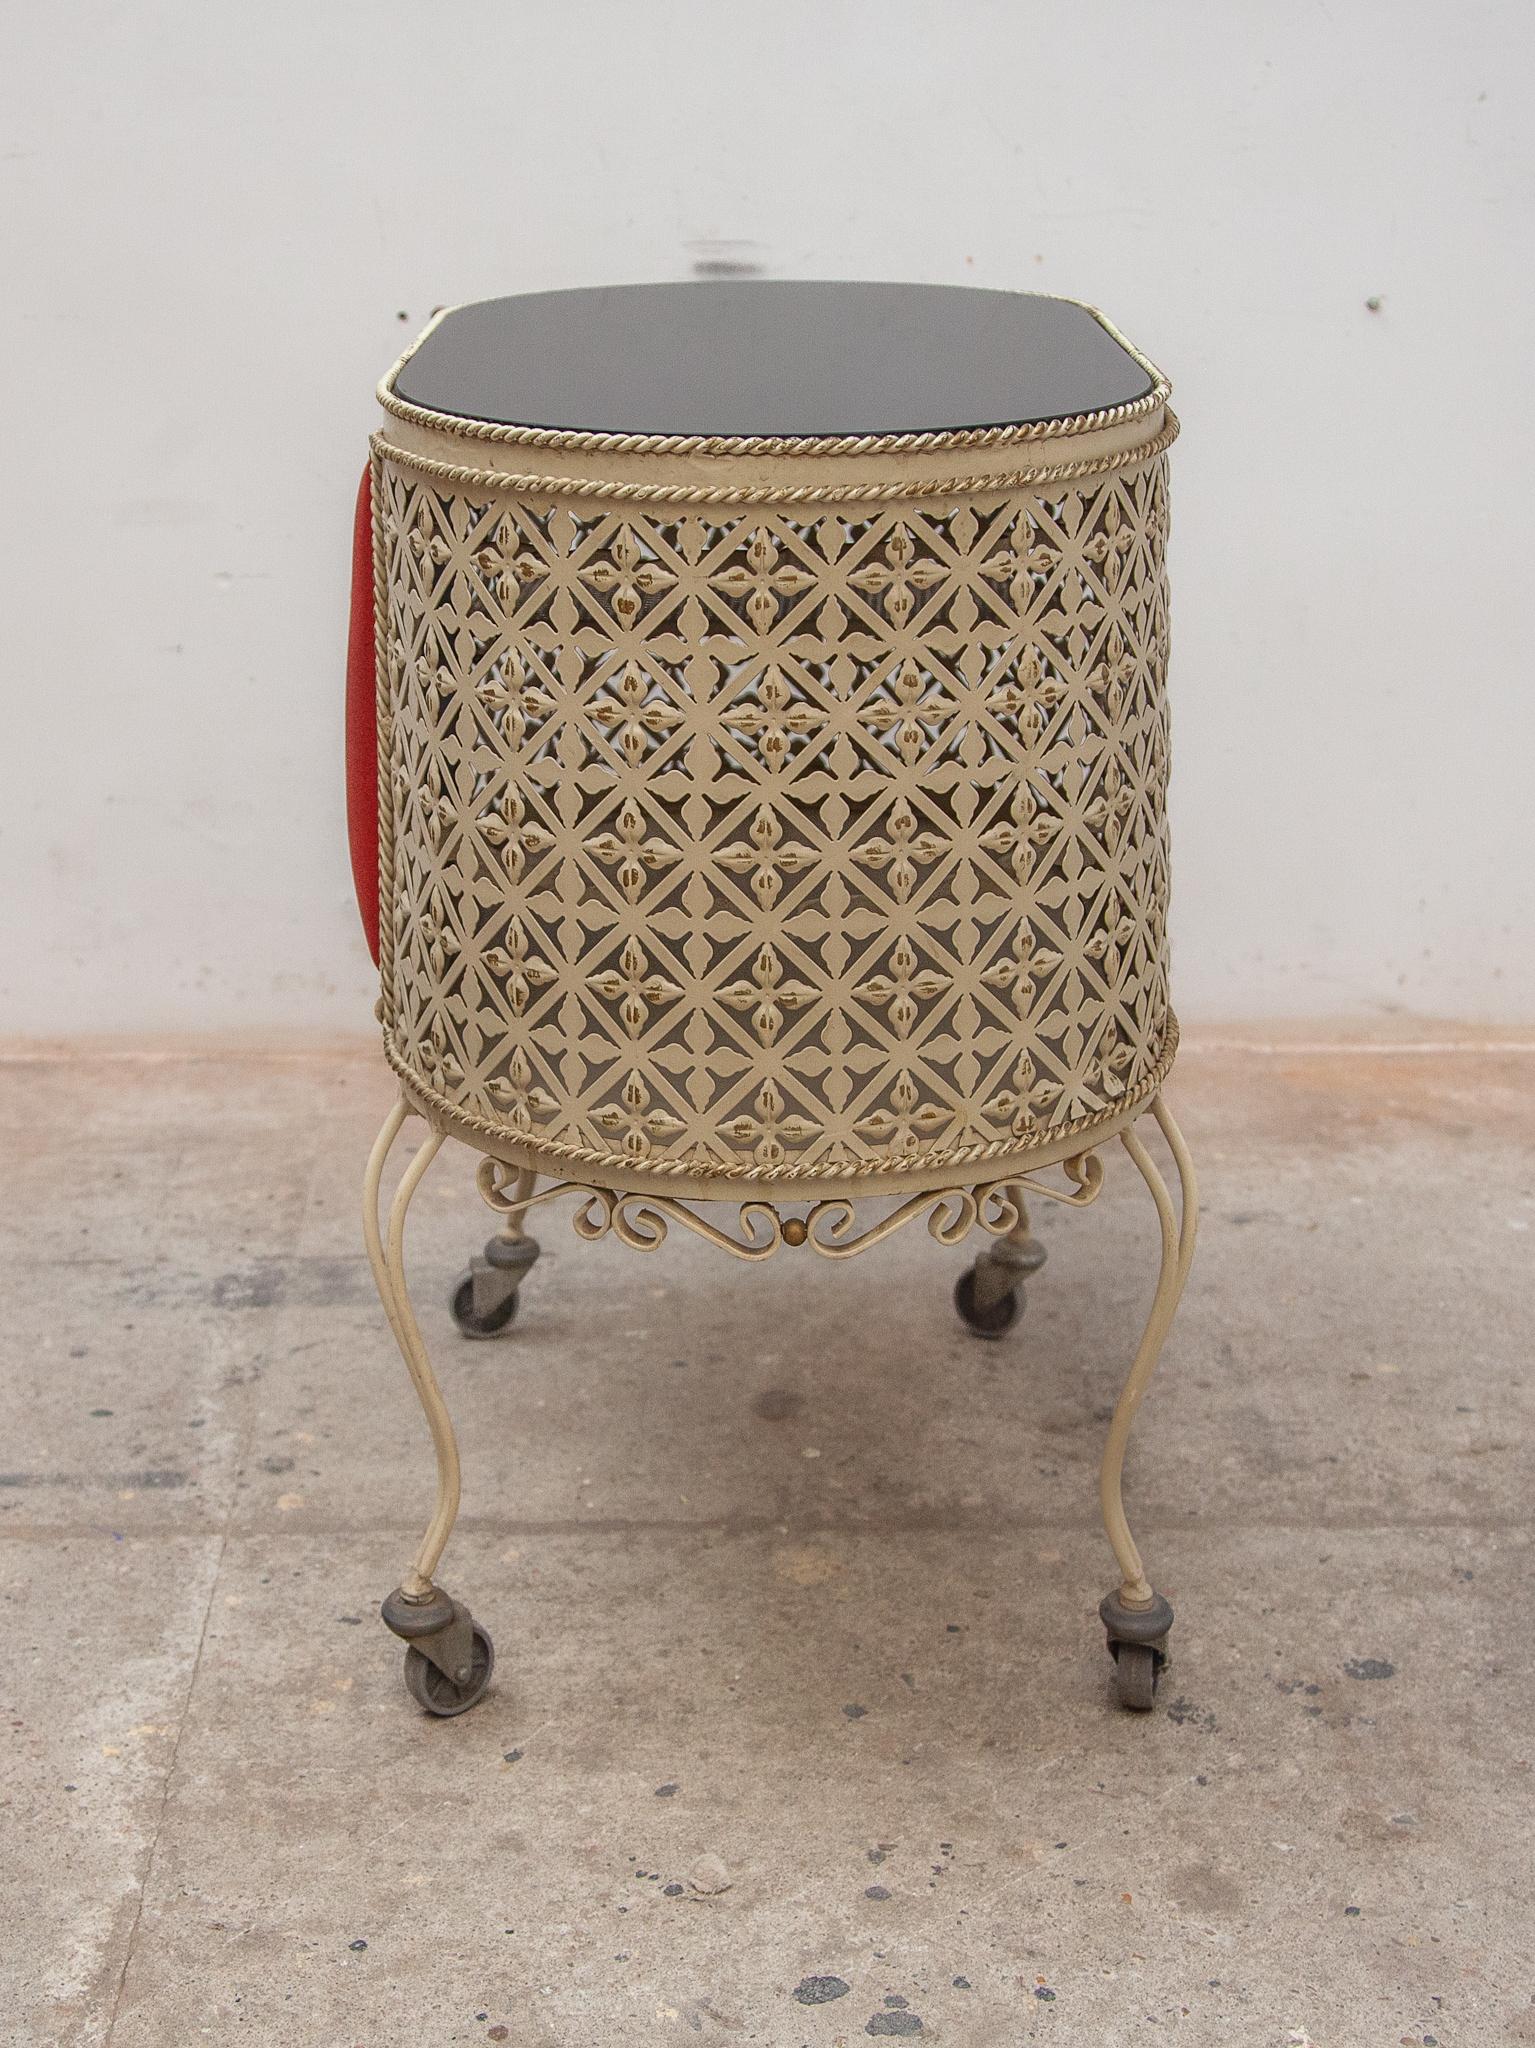 Hand-Crafted  Mathieu Matégot style Perforated Metal Bar Cart or Serving Table, 1950s For Sale